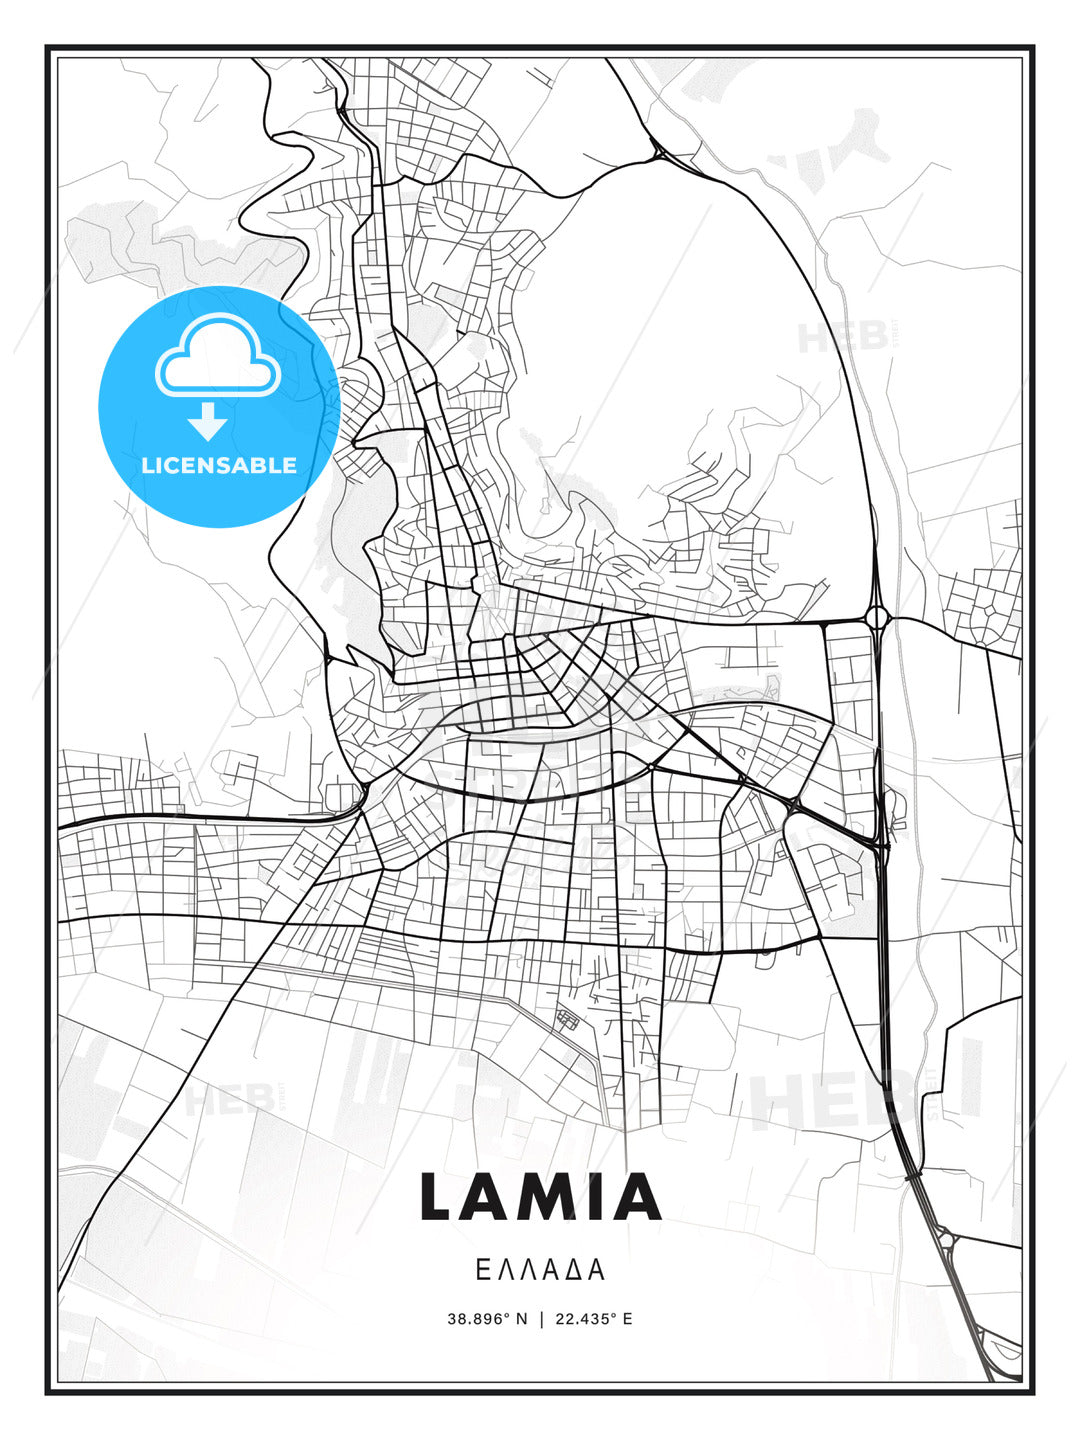 Lamia, Greece, Modern Print Template in Various Formats - HEBSTREITS Sketches